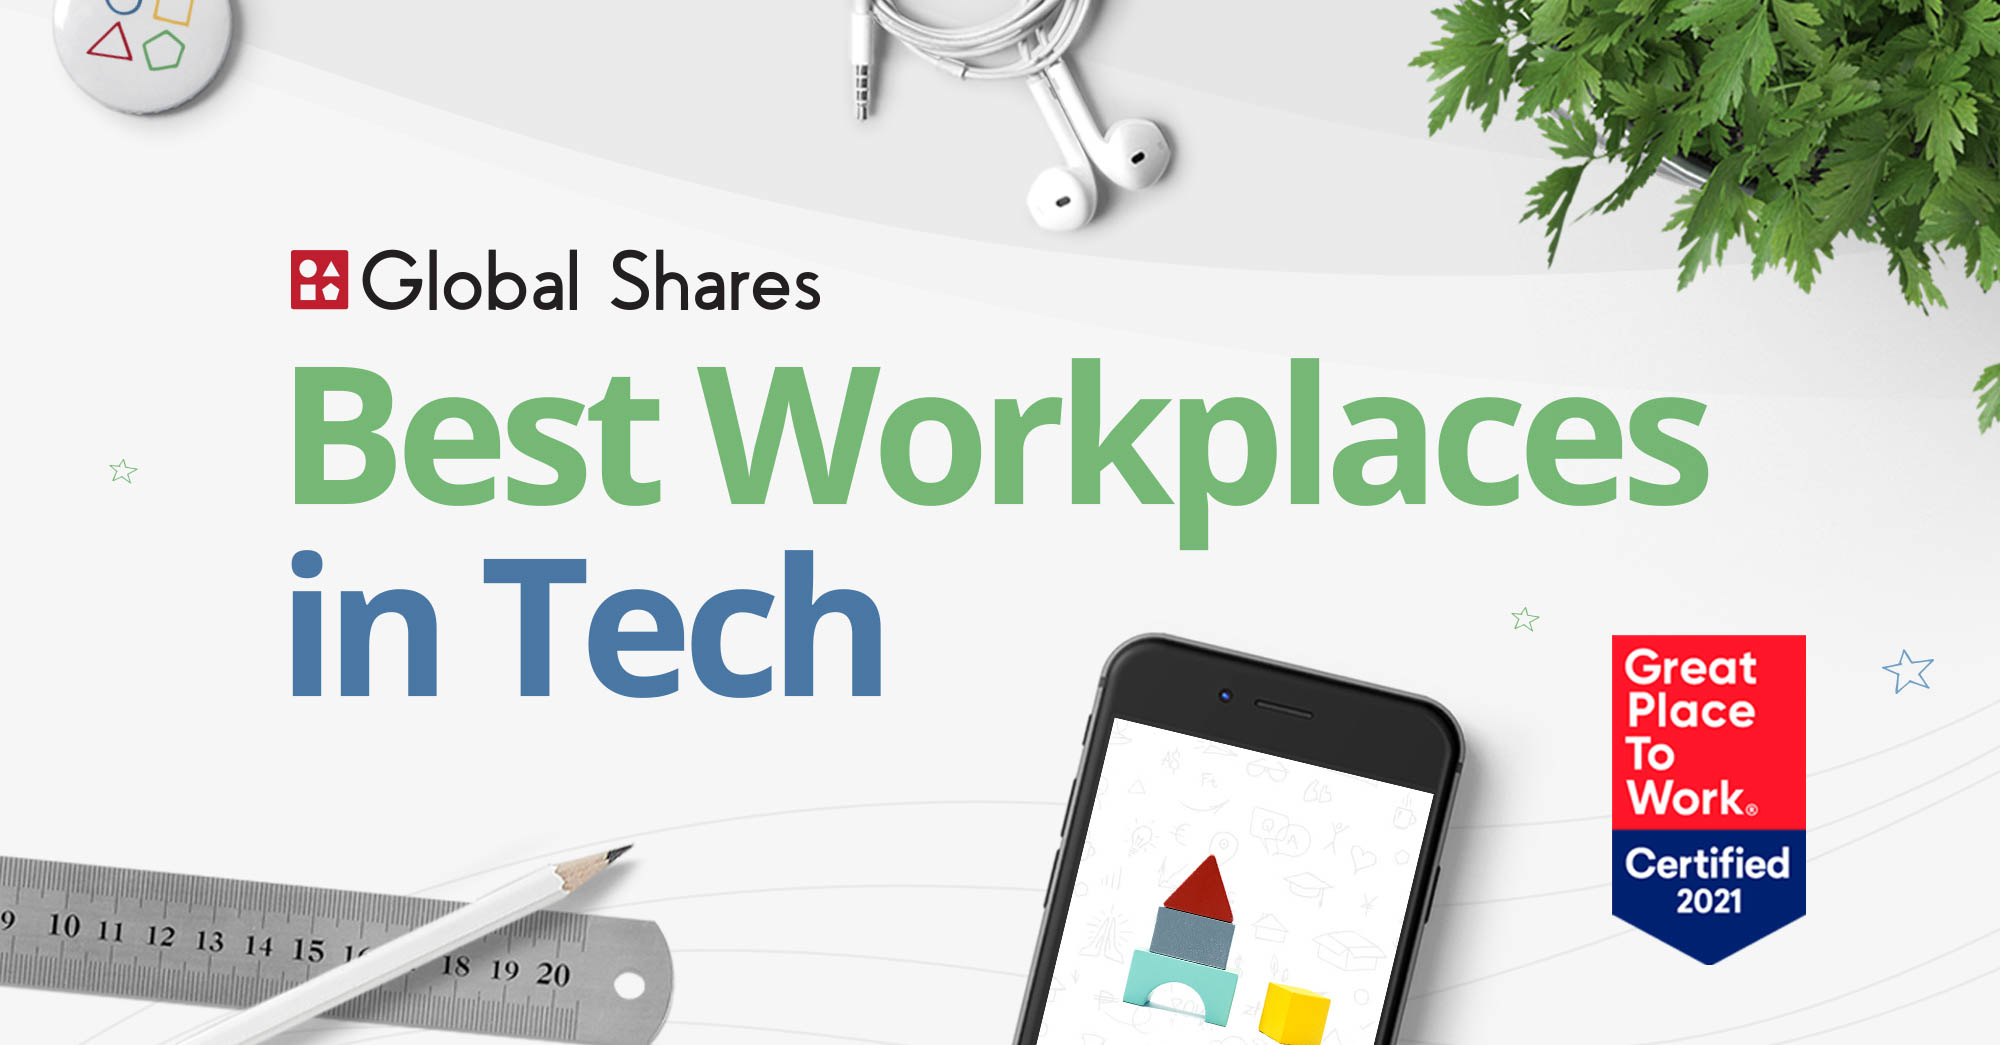 We’re one of Ireland’s ‘Best Workplaces in Tech’